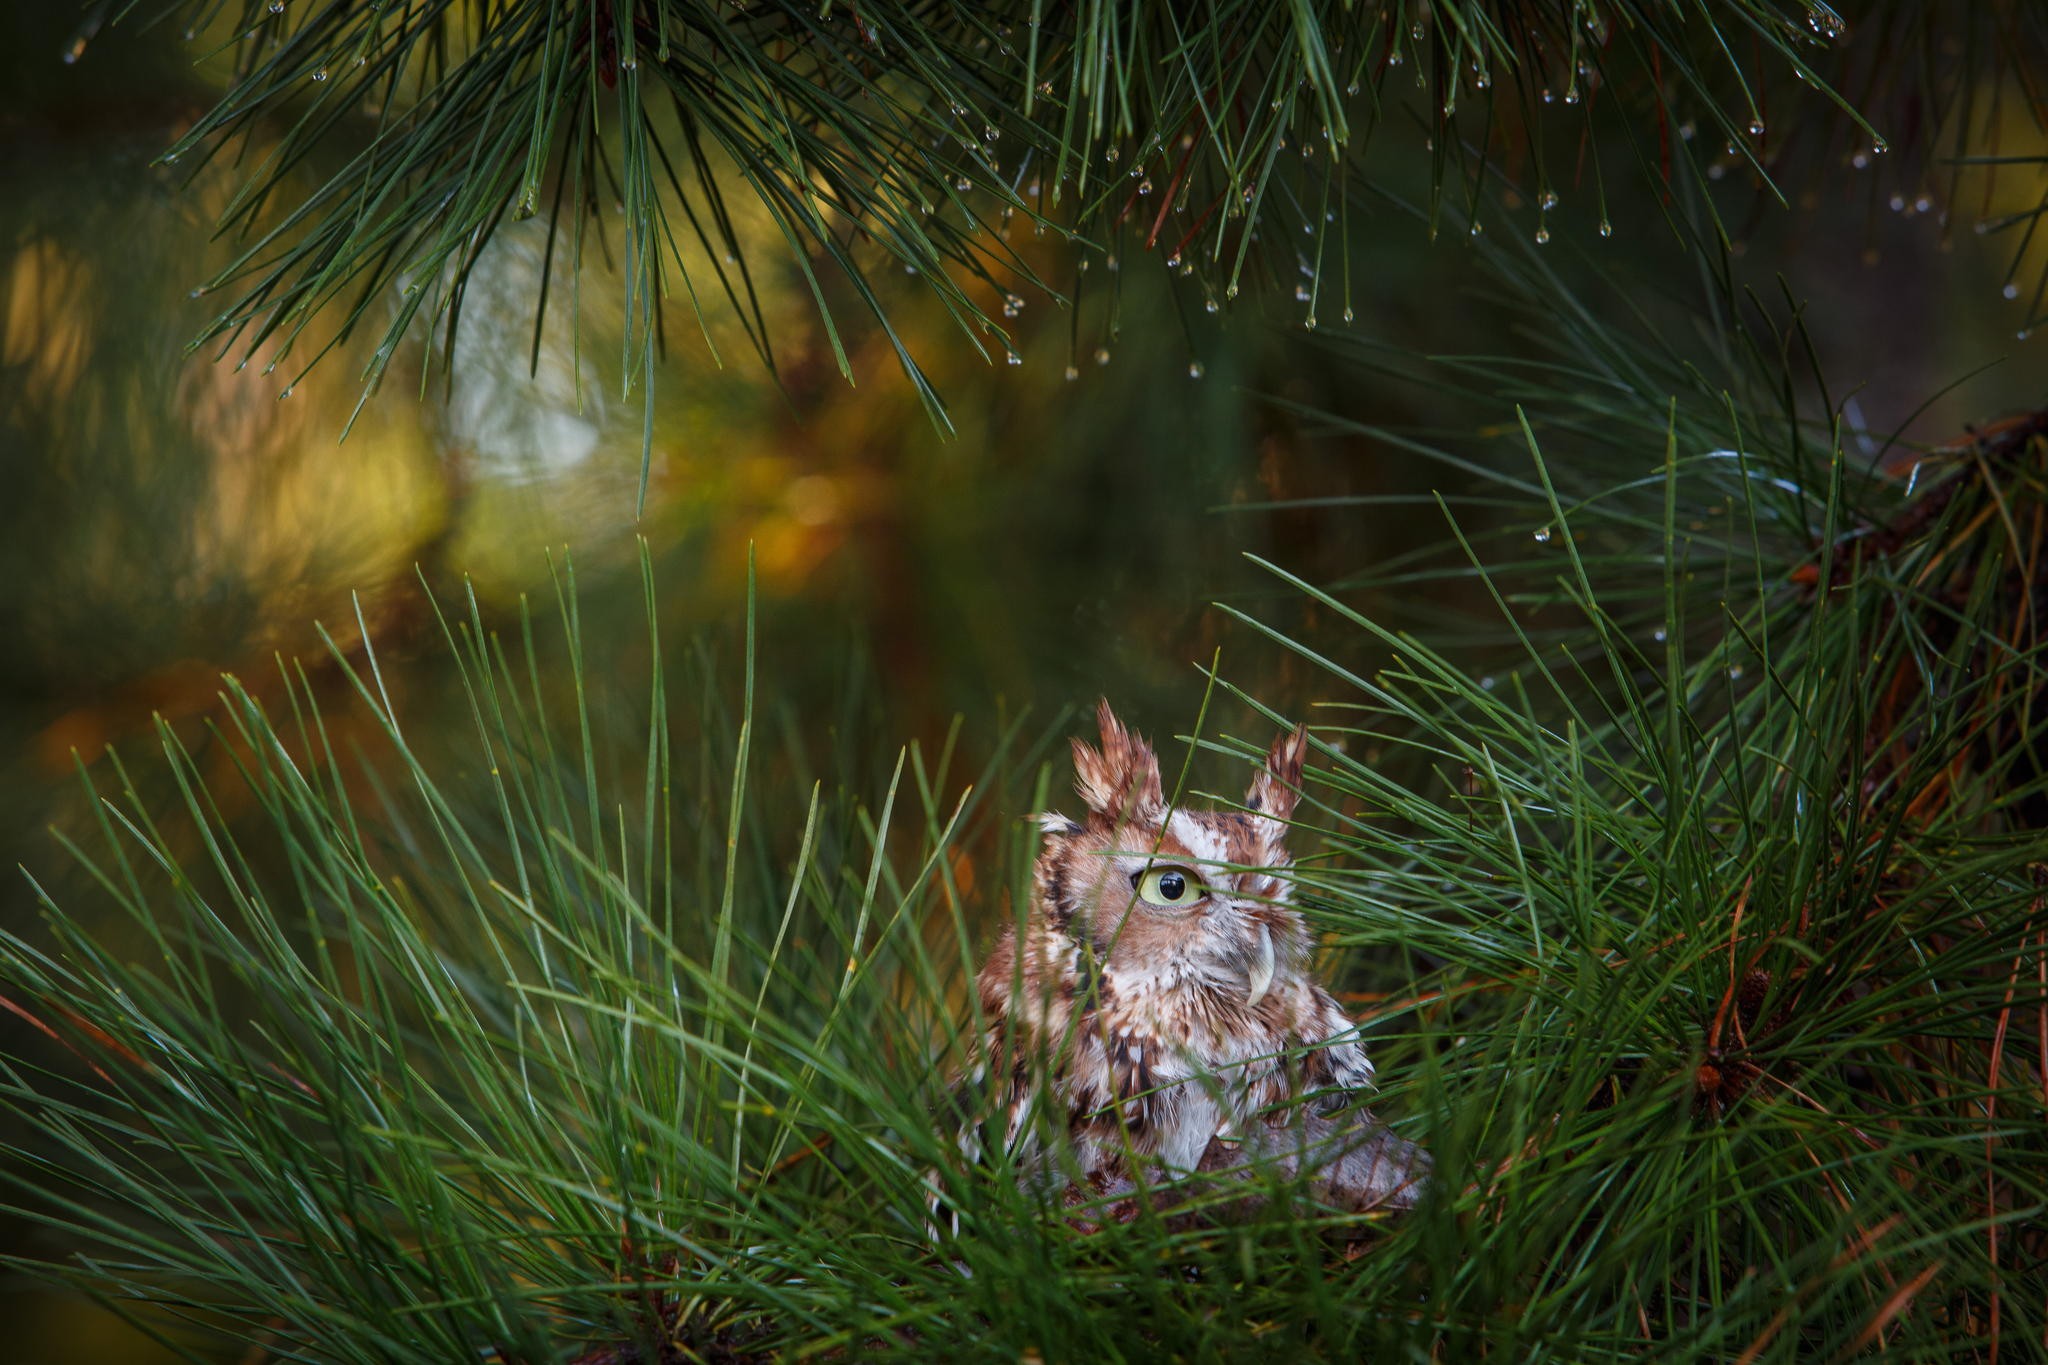 General 2048x1365 animals forest birds owl wet pine trees green water drops